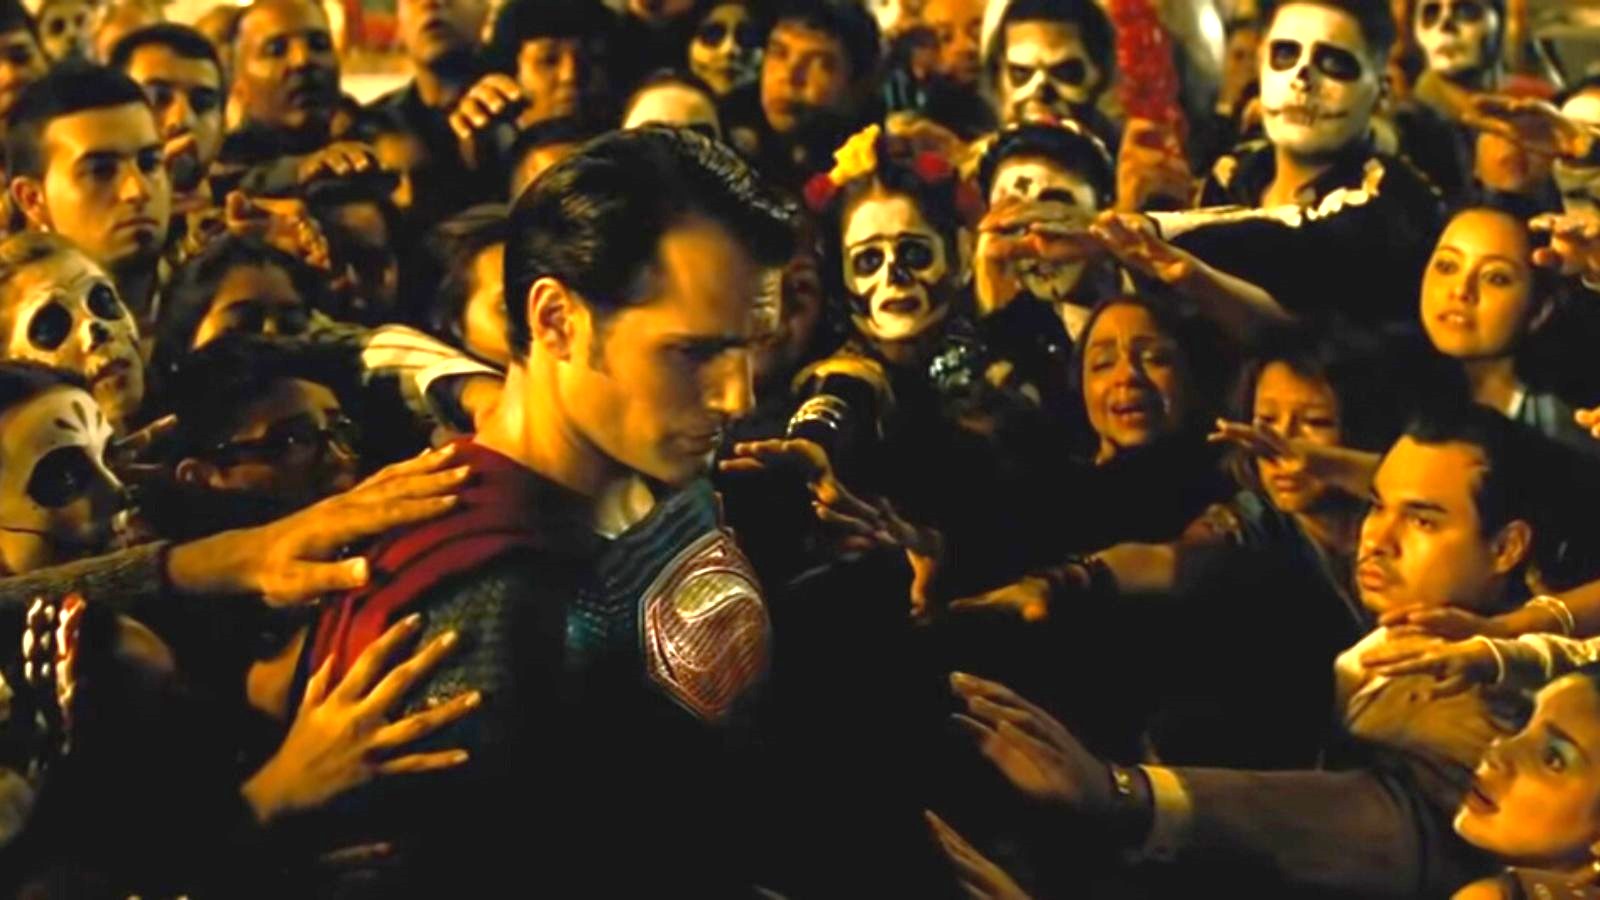 DC fans are ready to give up on Henry Cavill as Superman, but not without one last hope